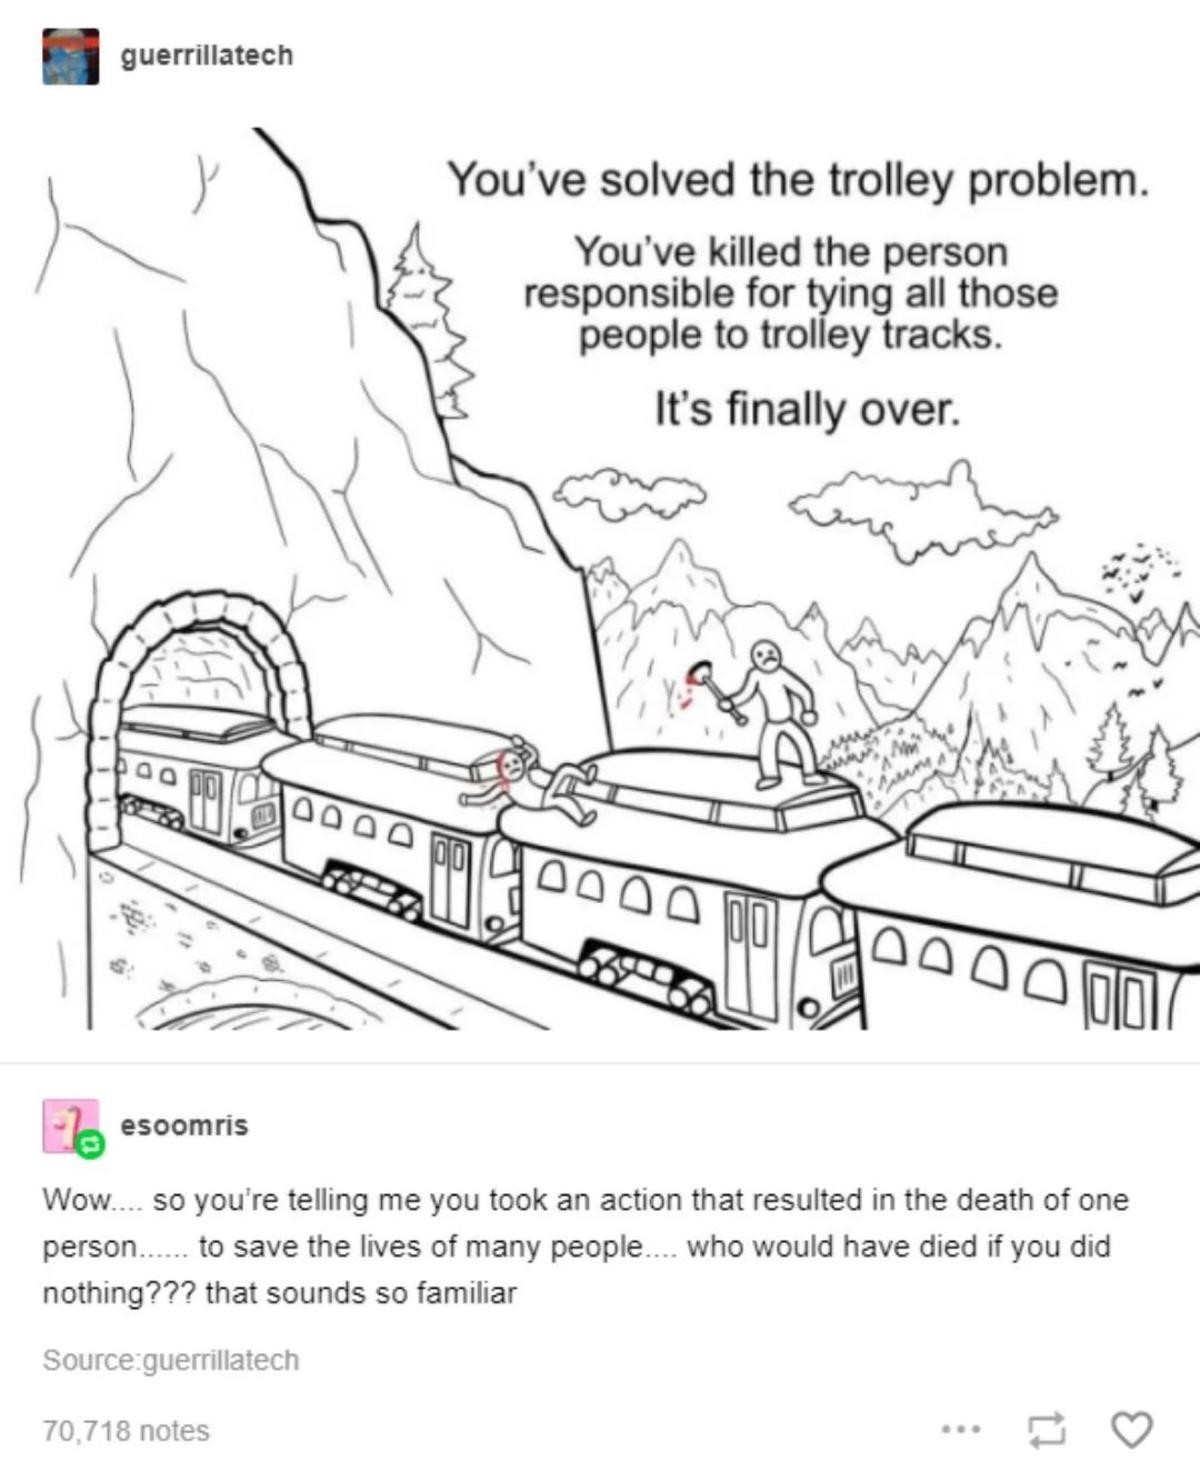 ill-informed Parrot. .. That's an over simplification of the Trolley problem. The fact the people im question were forced into this life and death scenario makes it a problem. The auto